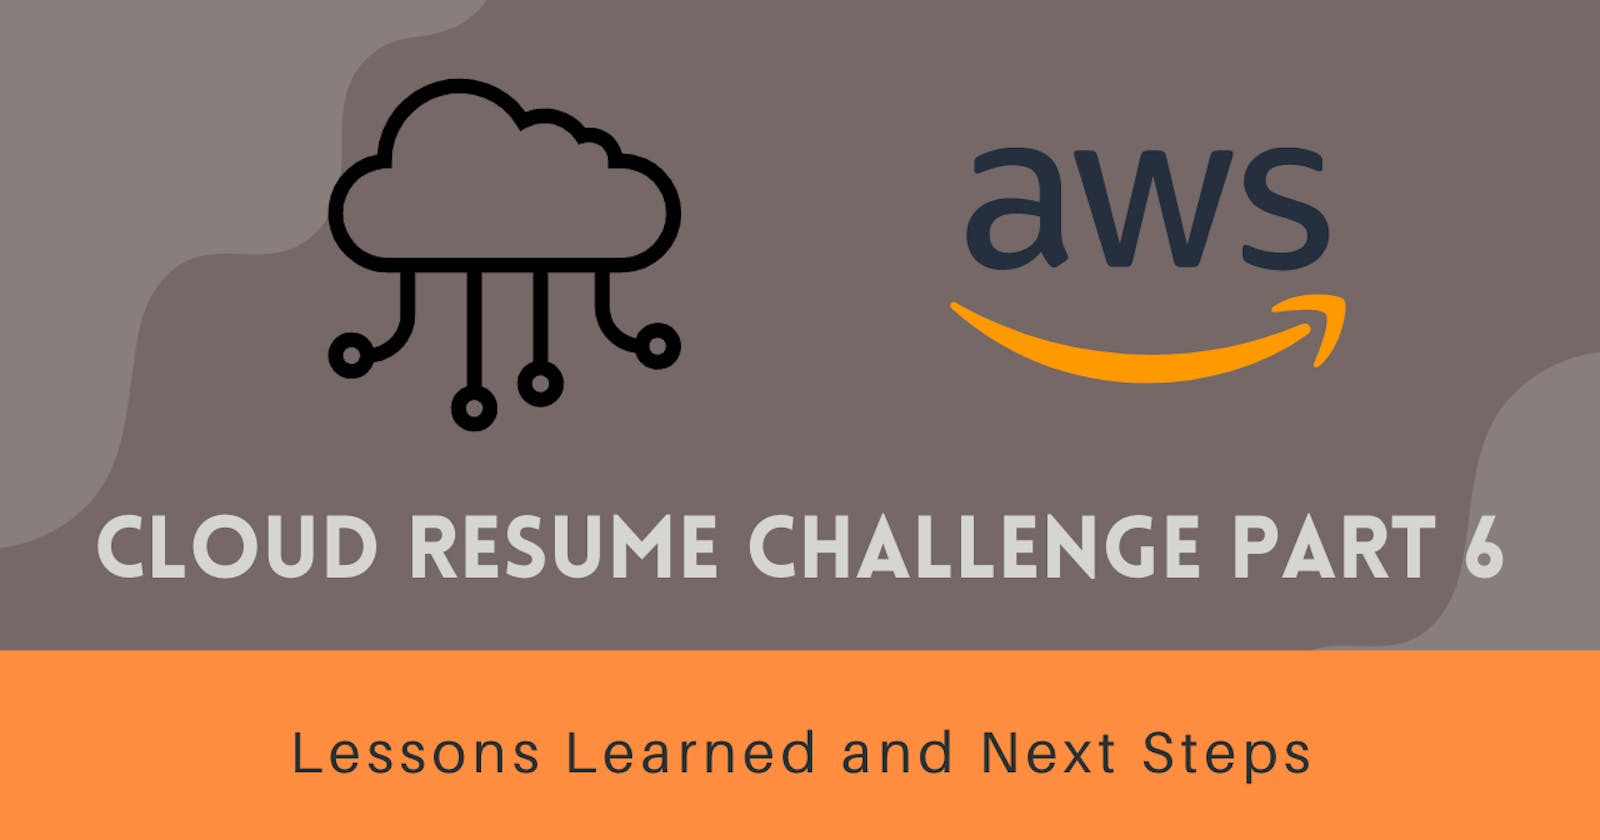 Cloud Resume Challenge Part 6 - Lessons Learned and Next Steps